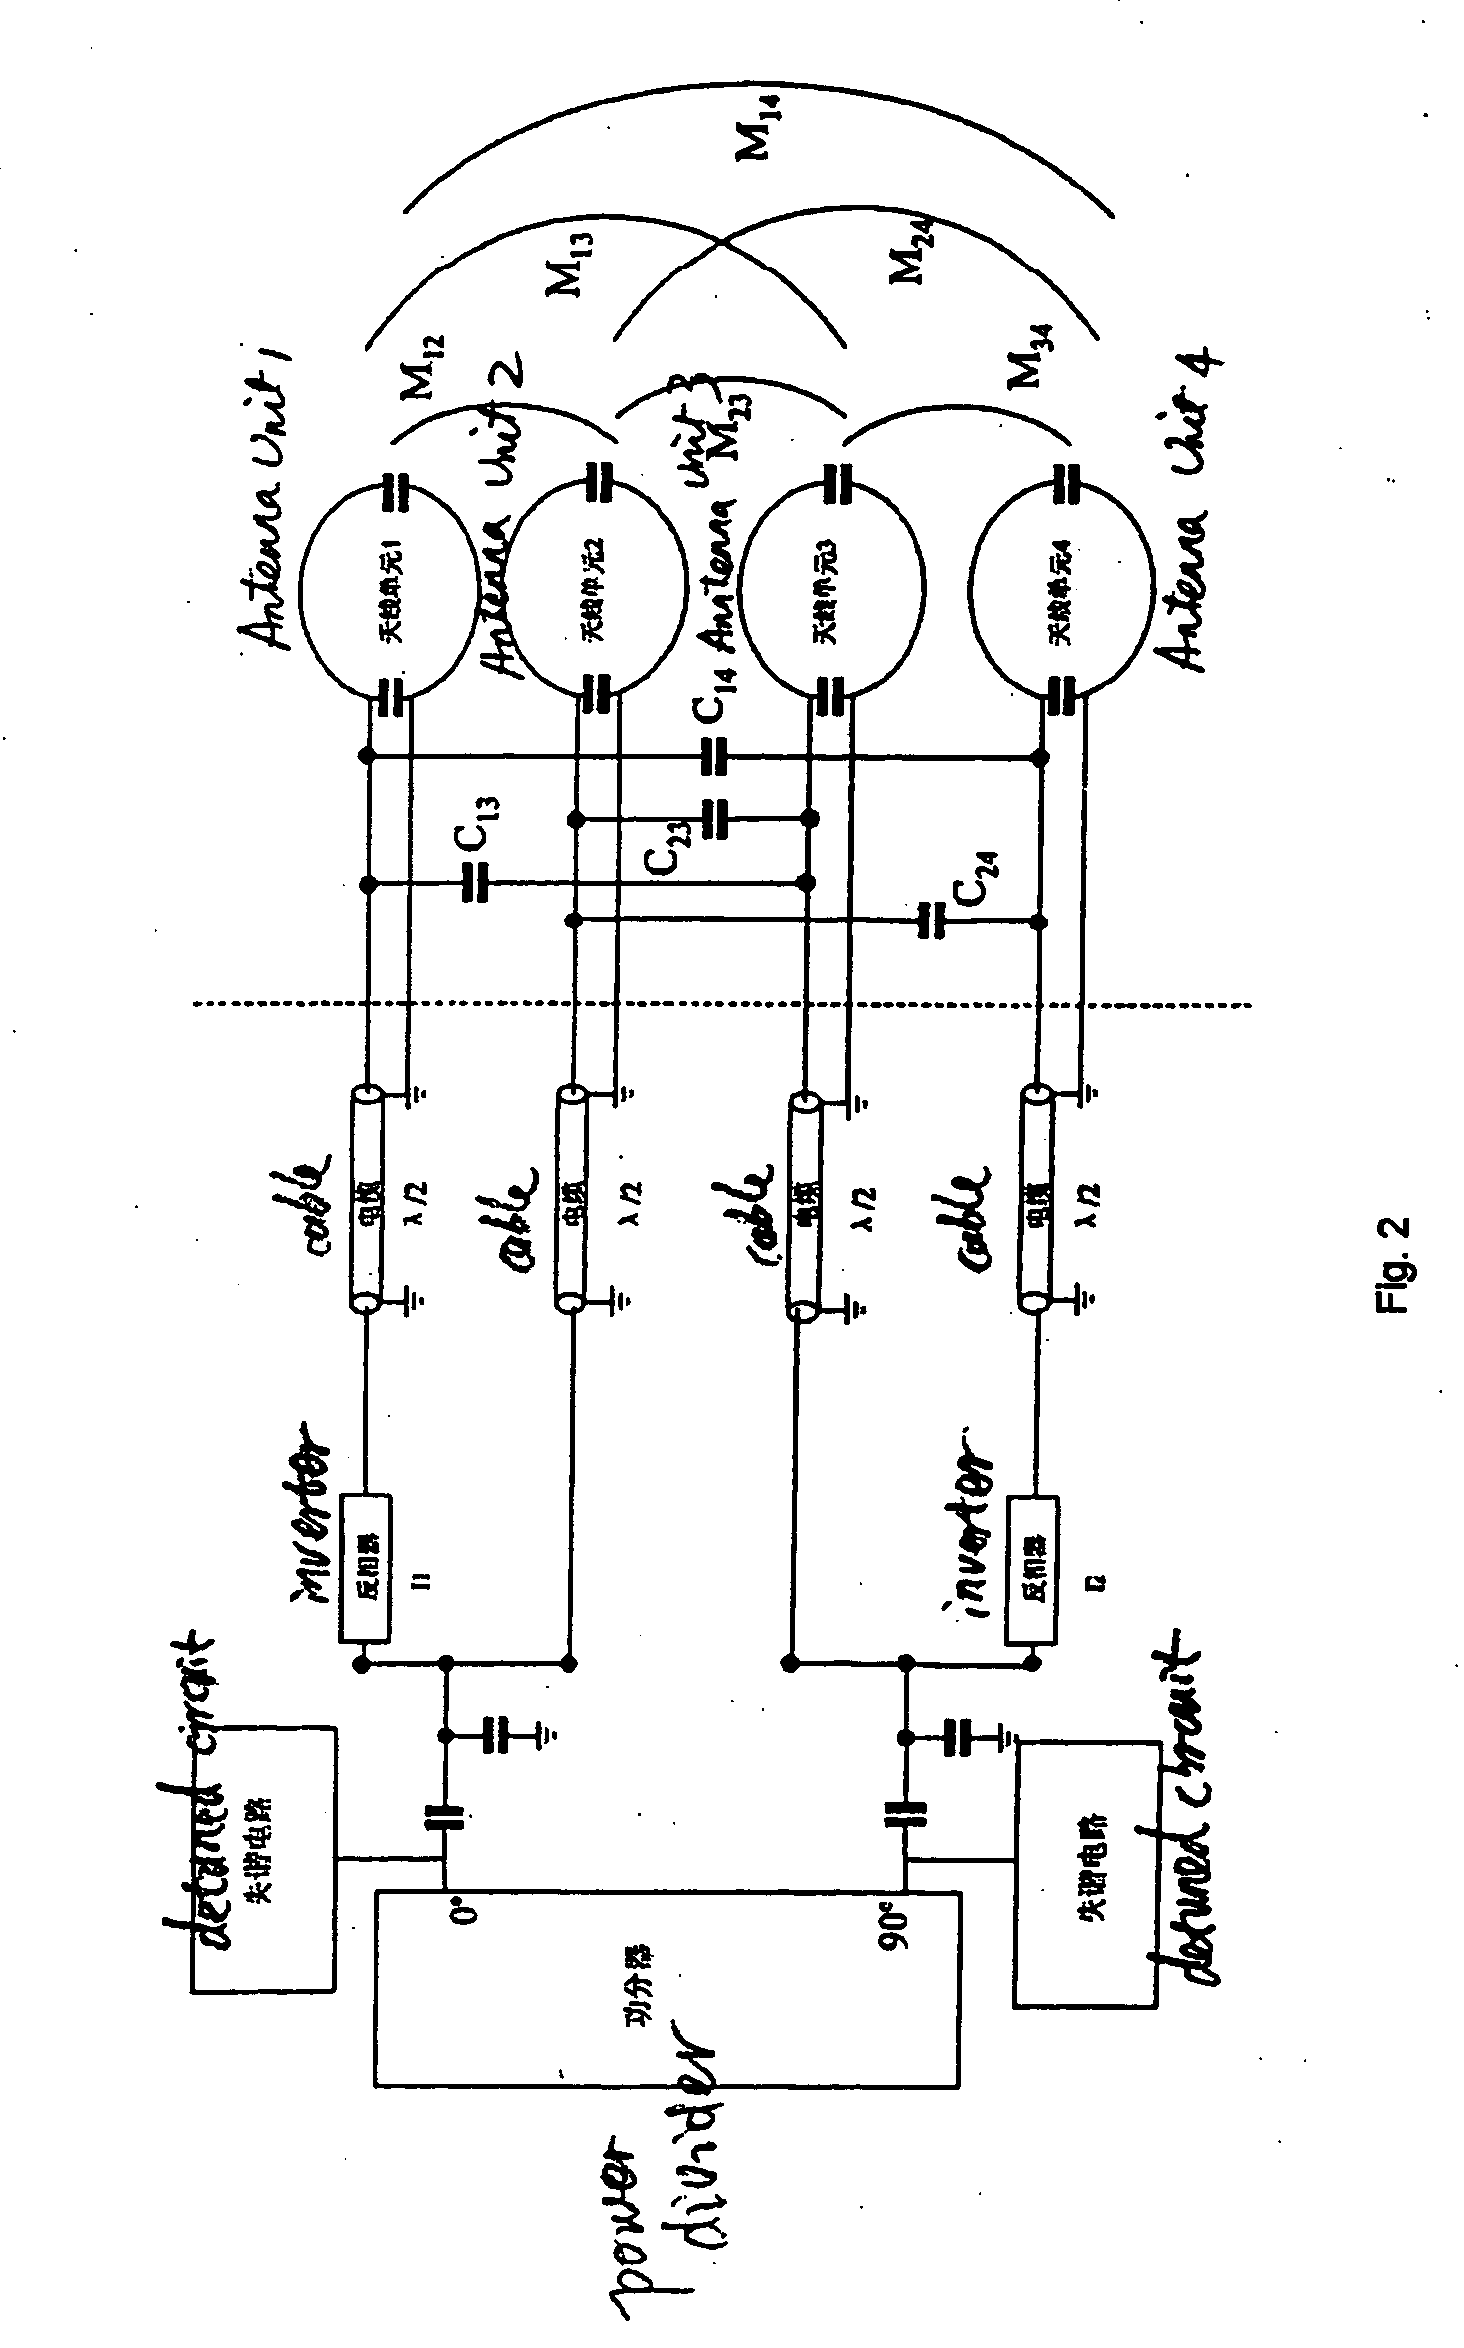 Method for developing a transmit coil of a magnetic resonance system